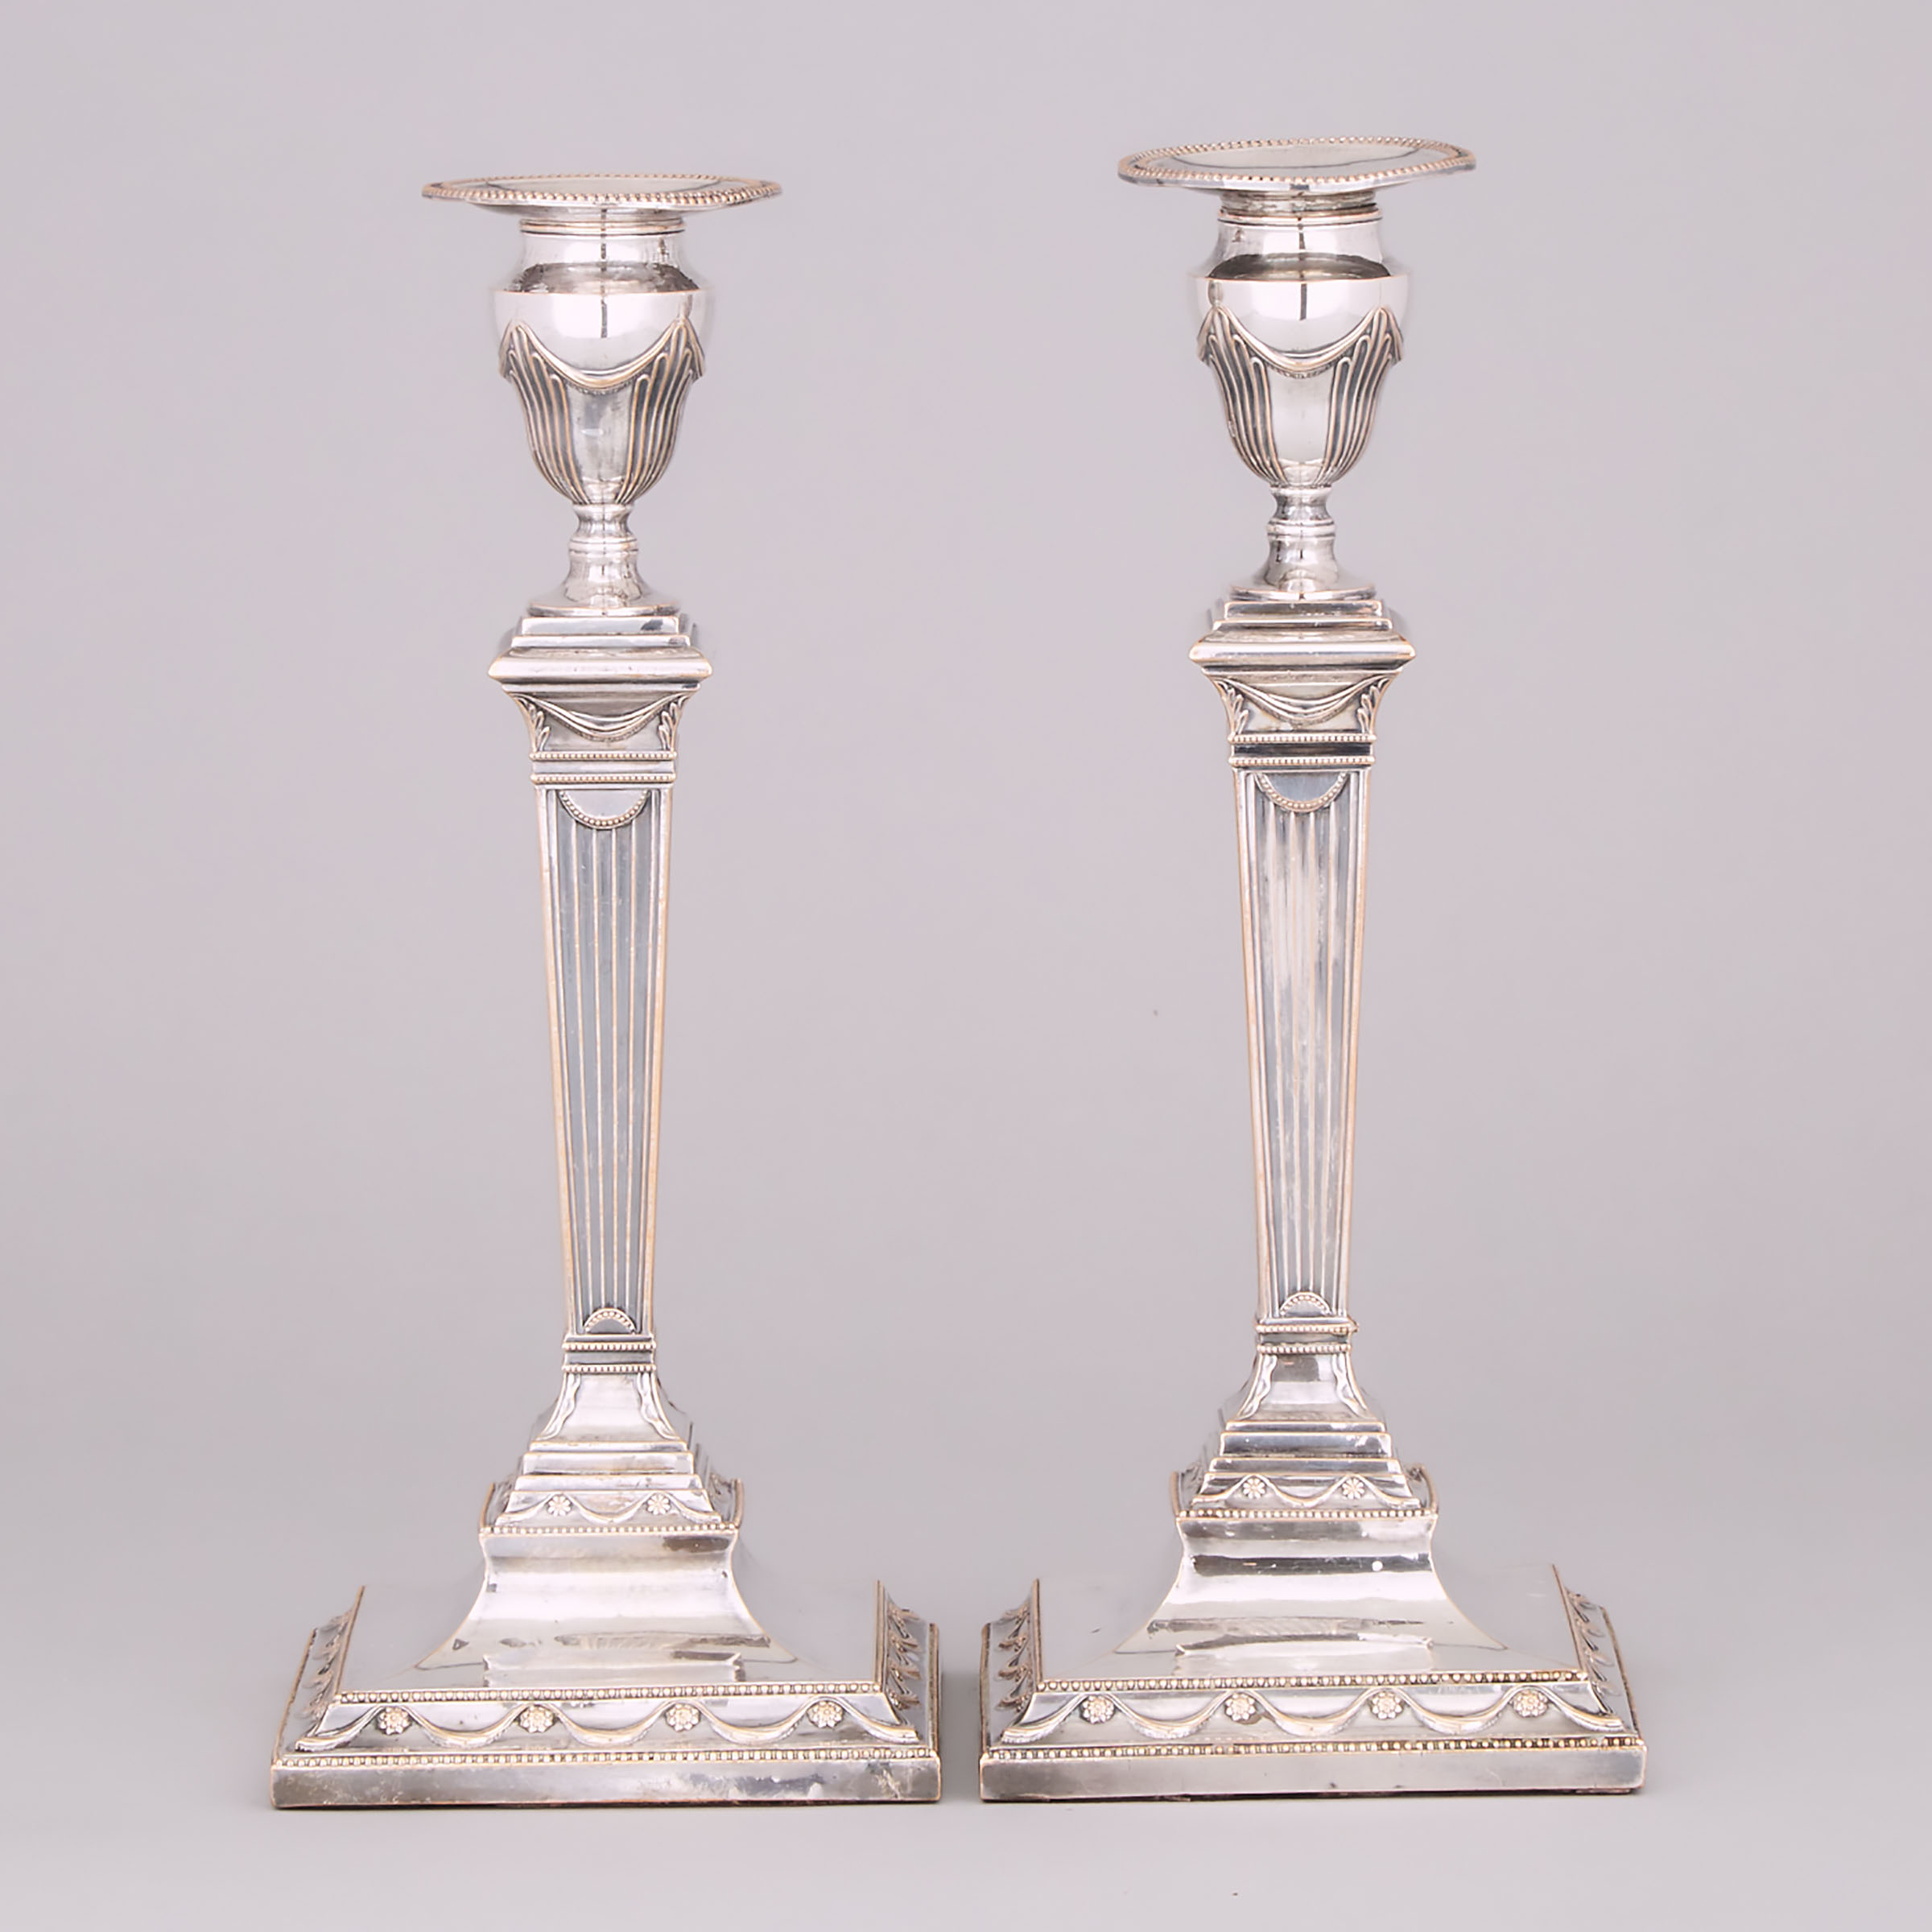 Pair of Old Sheffield Plate Table Candlesticks, c.1800